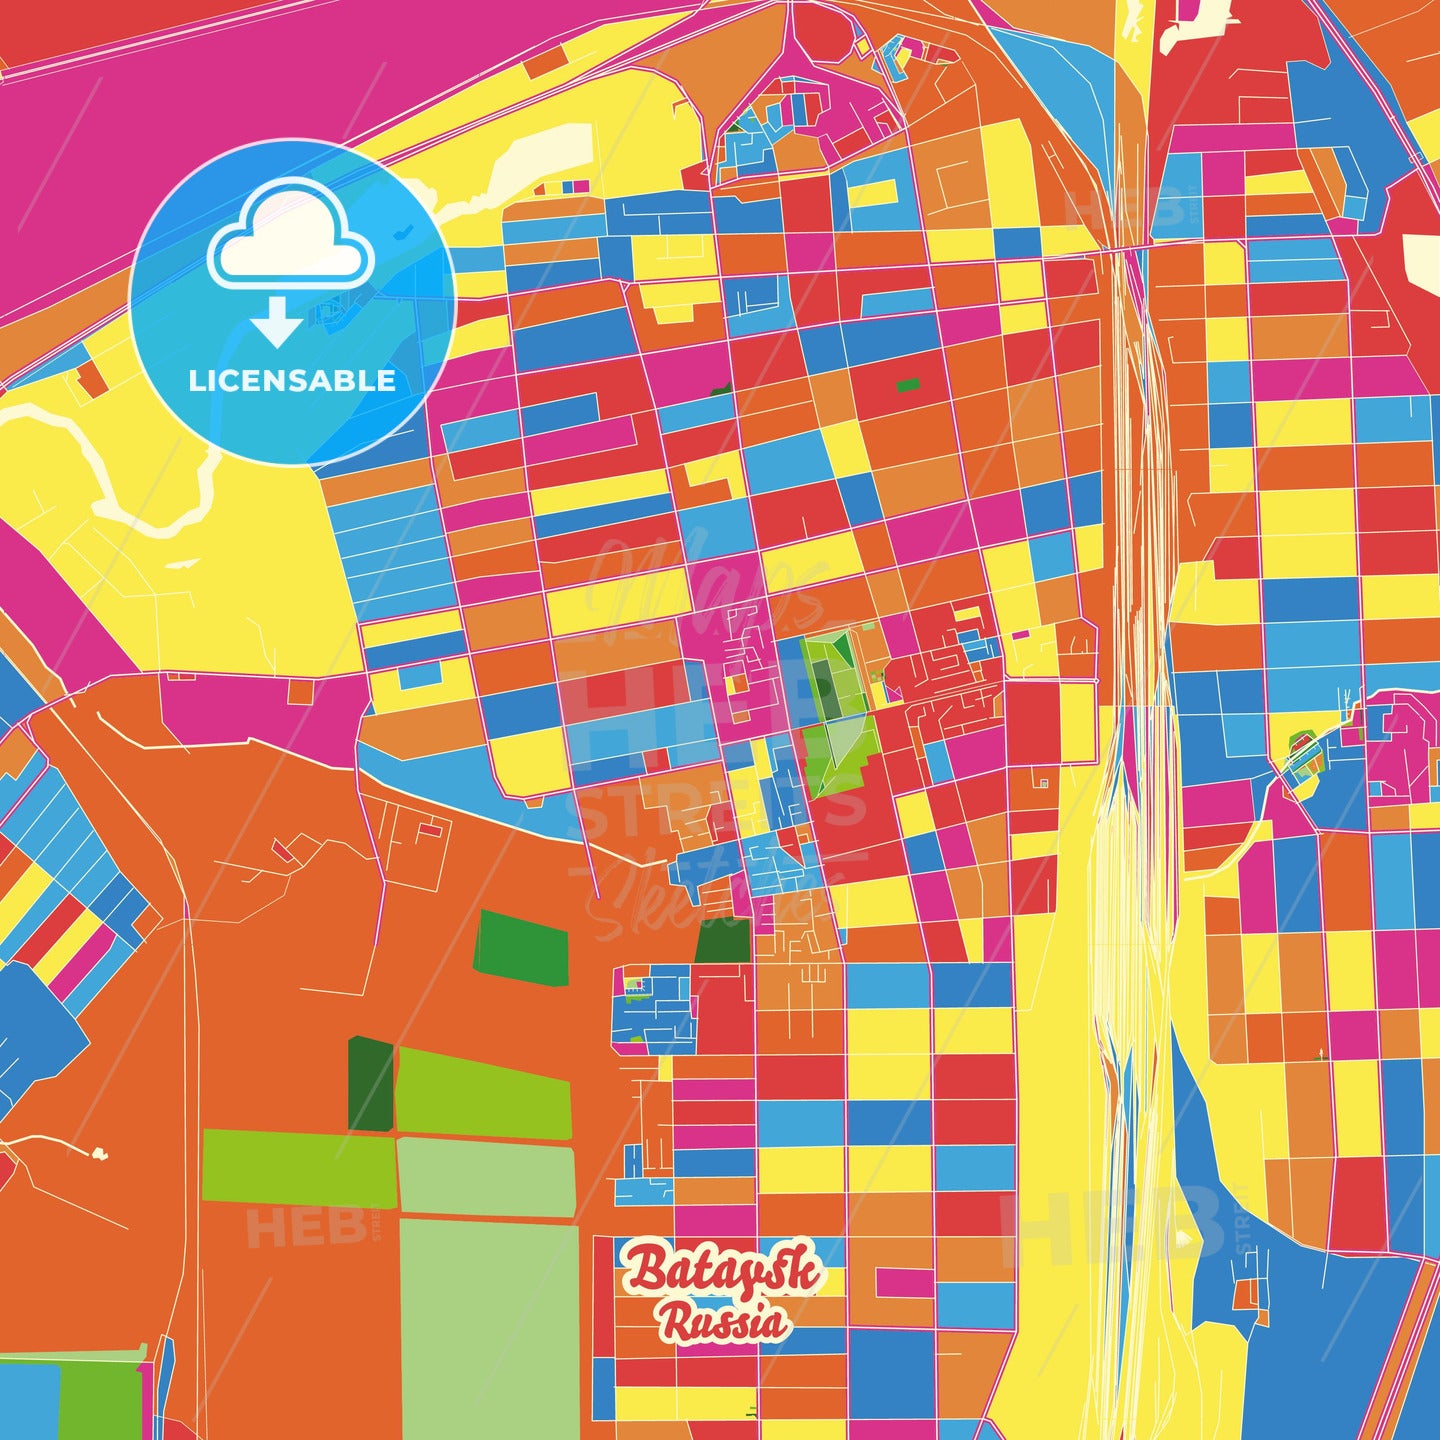 Bataysk, Russia Crazy Colorful Street Map Poster Template - HEBSTREITS Sketches